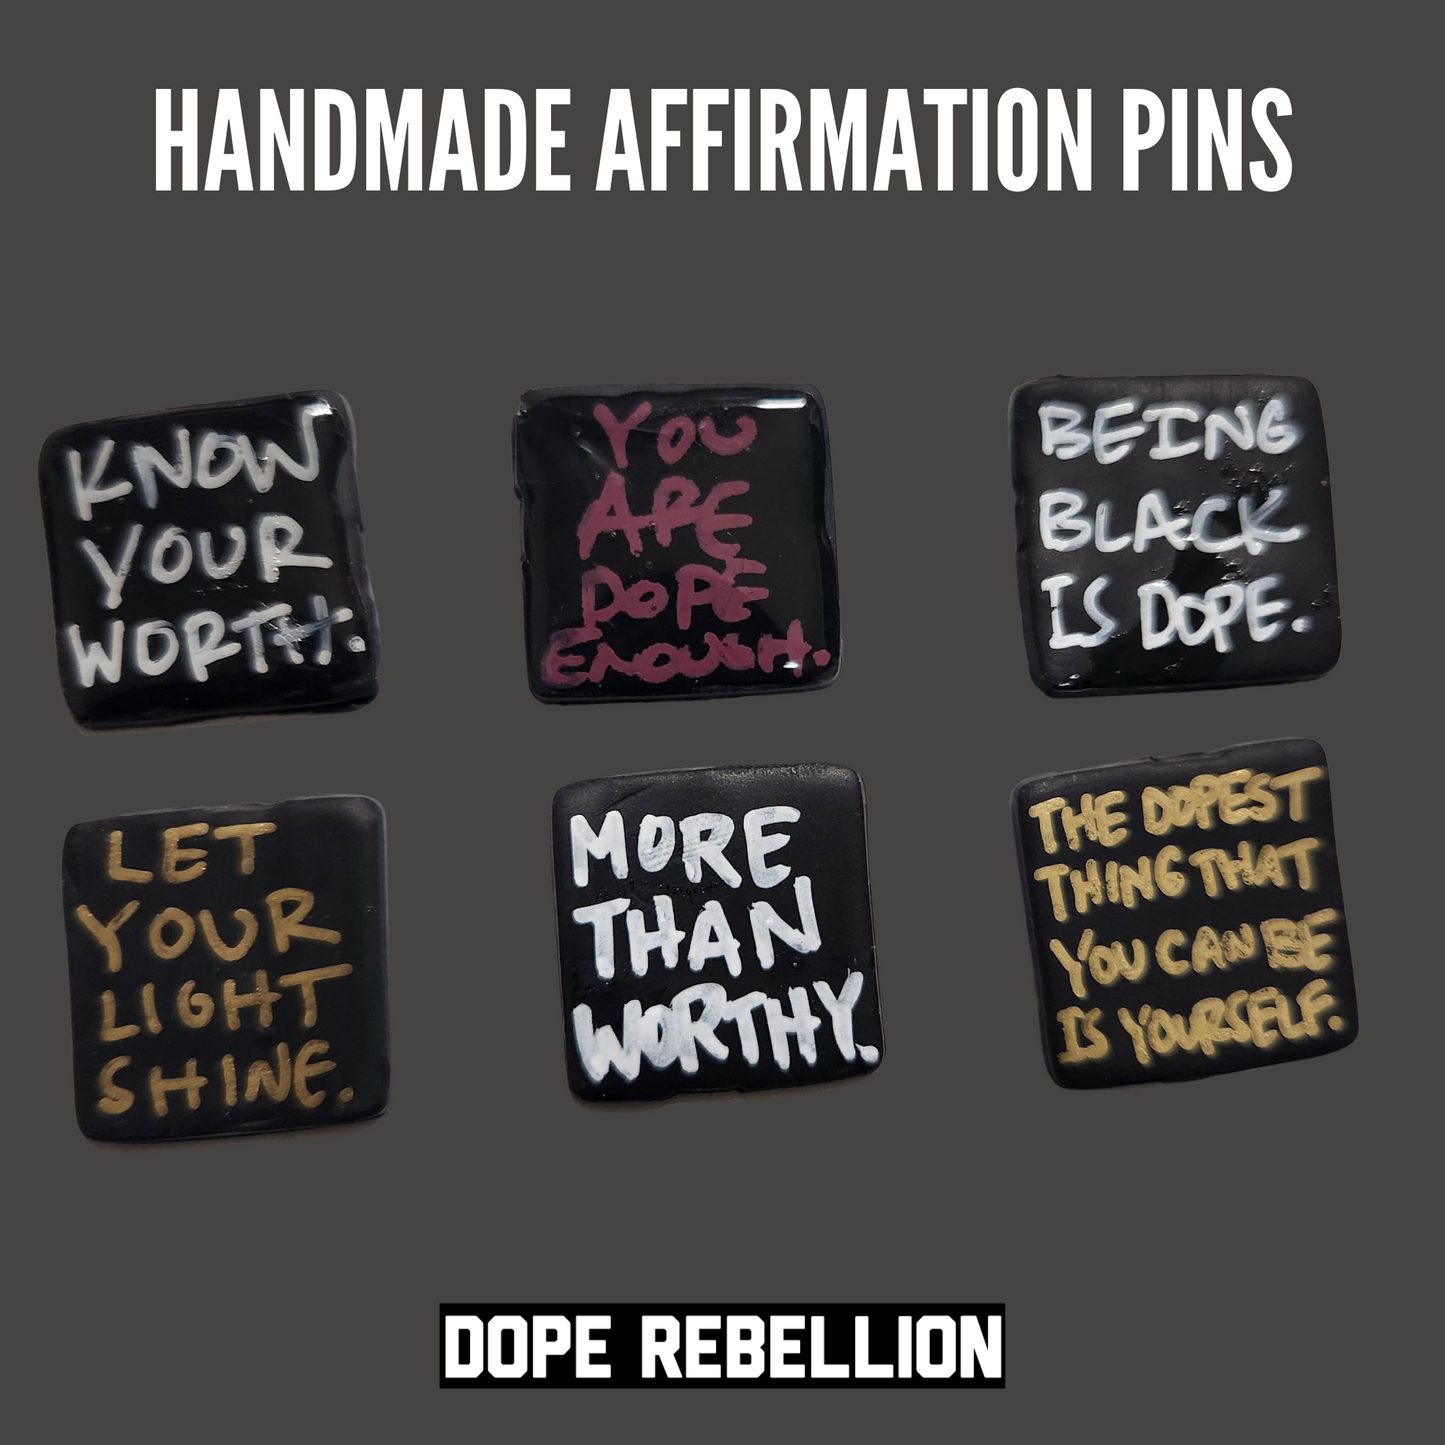 QUOTES/AFFIRMATION PINS